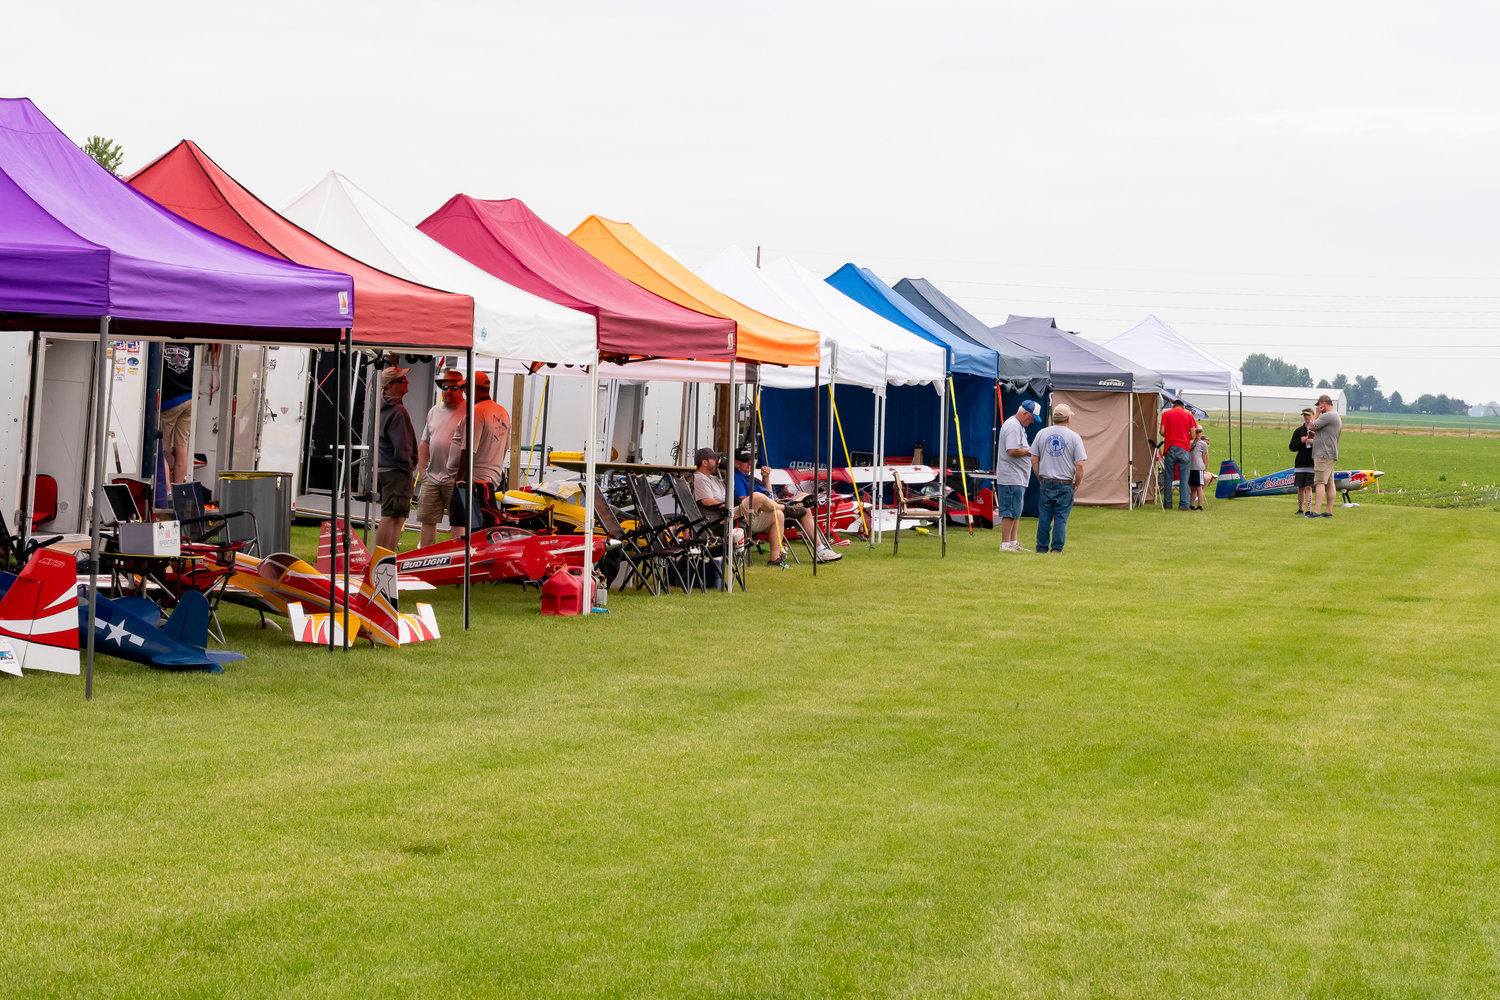 The Lone Tree Flyers’ airfield was filled with tents from local and traveling model airplane pilots.